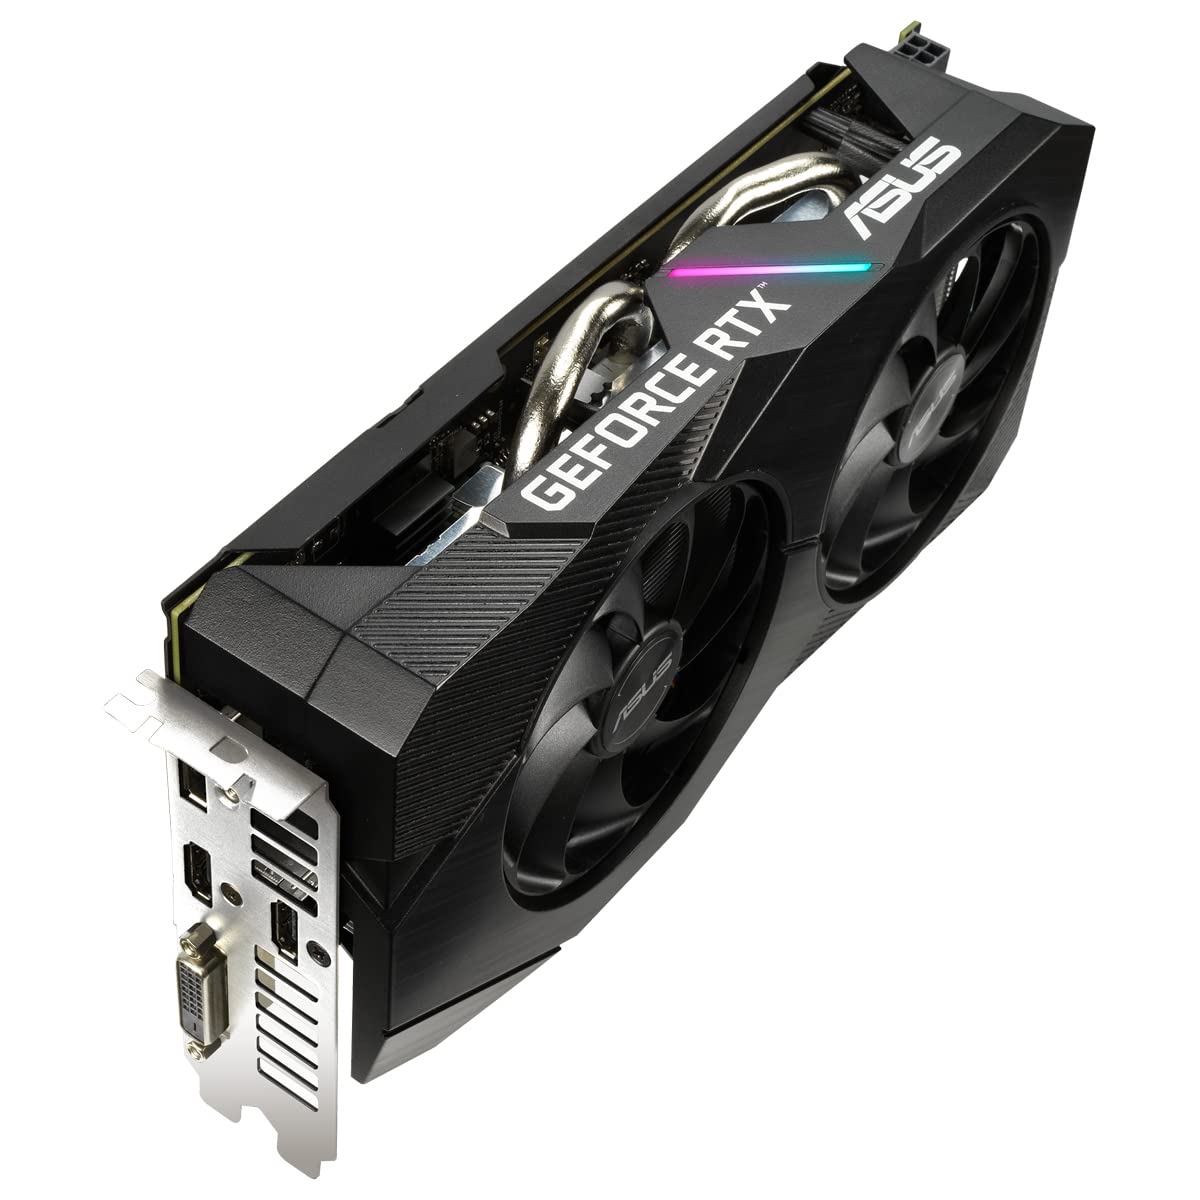 ASUS Dual GeForce RTX™ 2060 EVO OC Edition 12GB GDDR6 features two powerful Axial-tech fans for AAA gaming performance and ray tracing